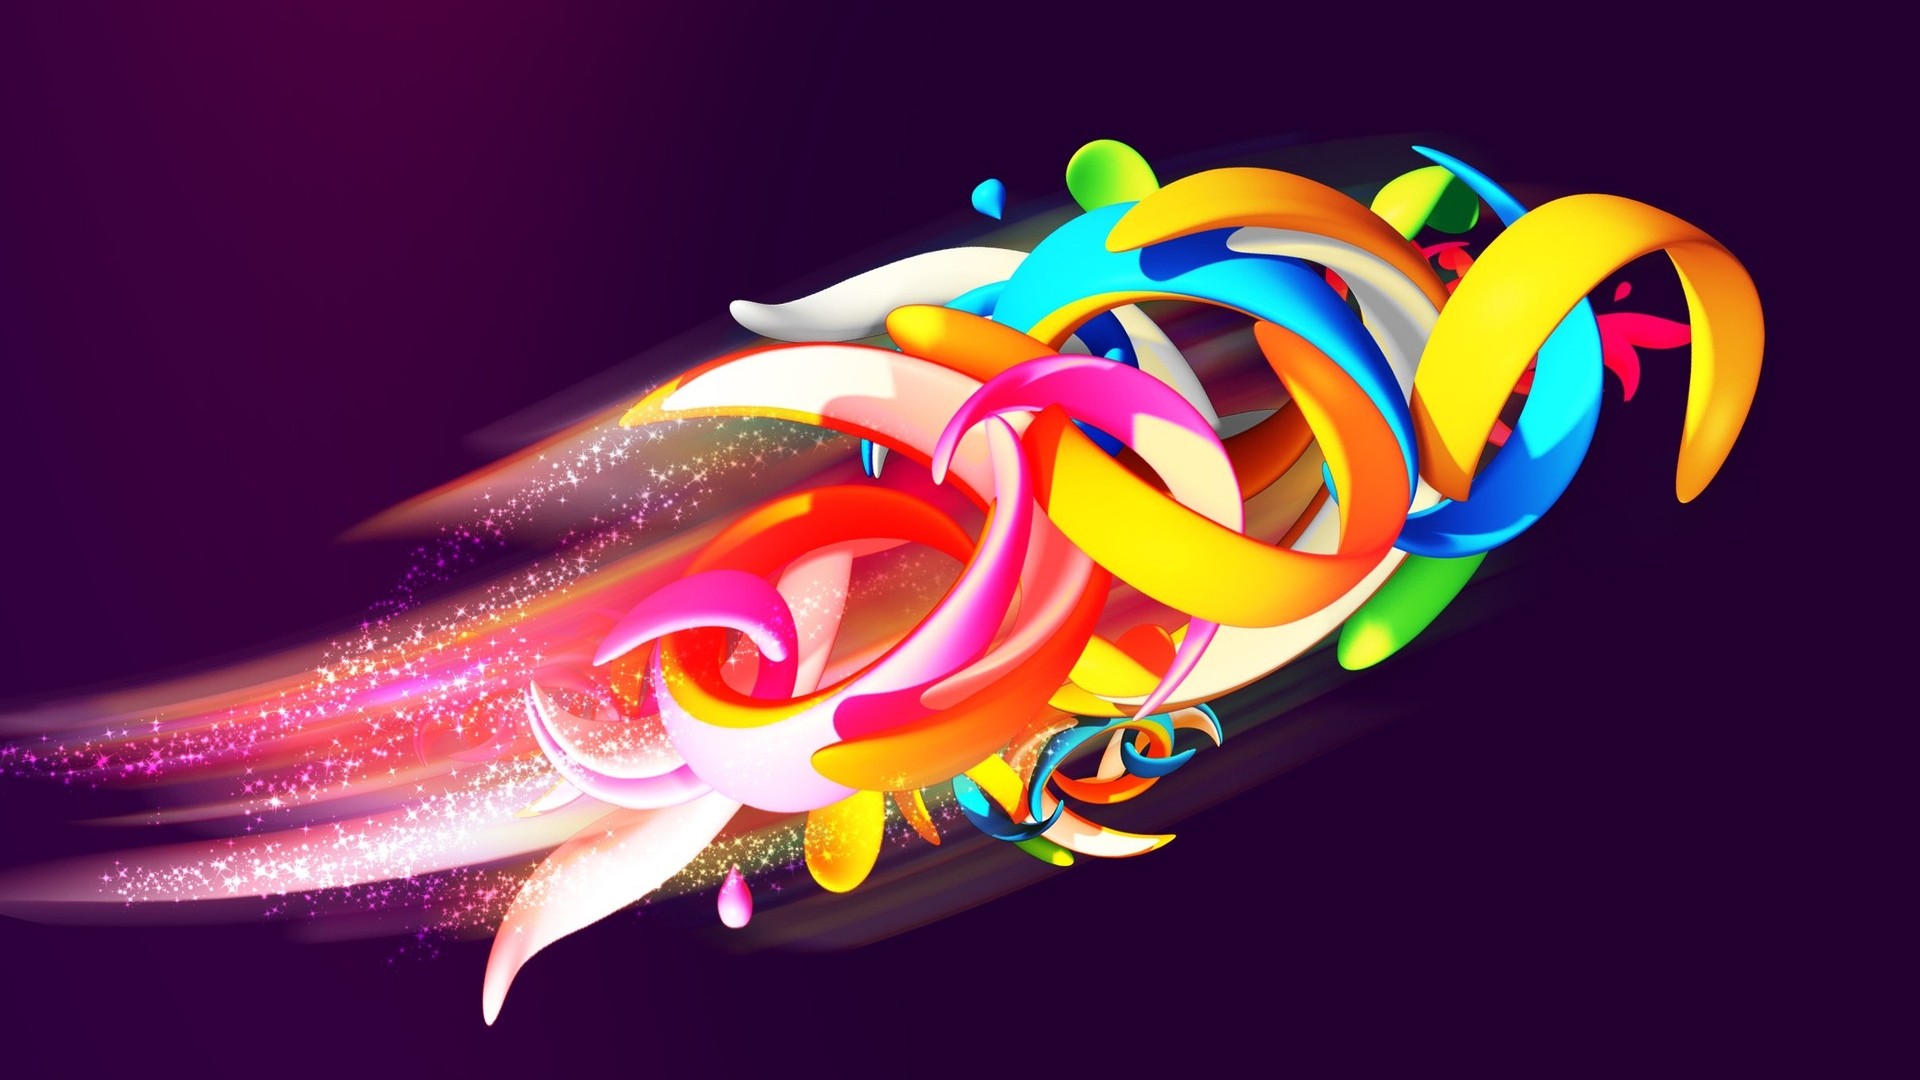 abstract wallpaper desktop shapes colorful 1920x1080 1920x1080